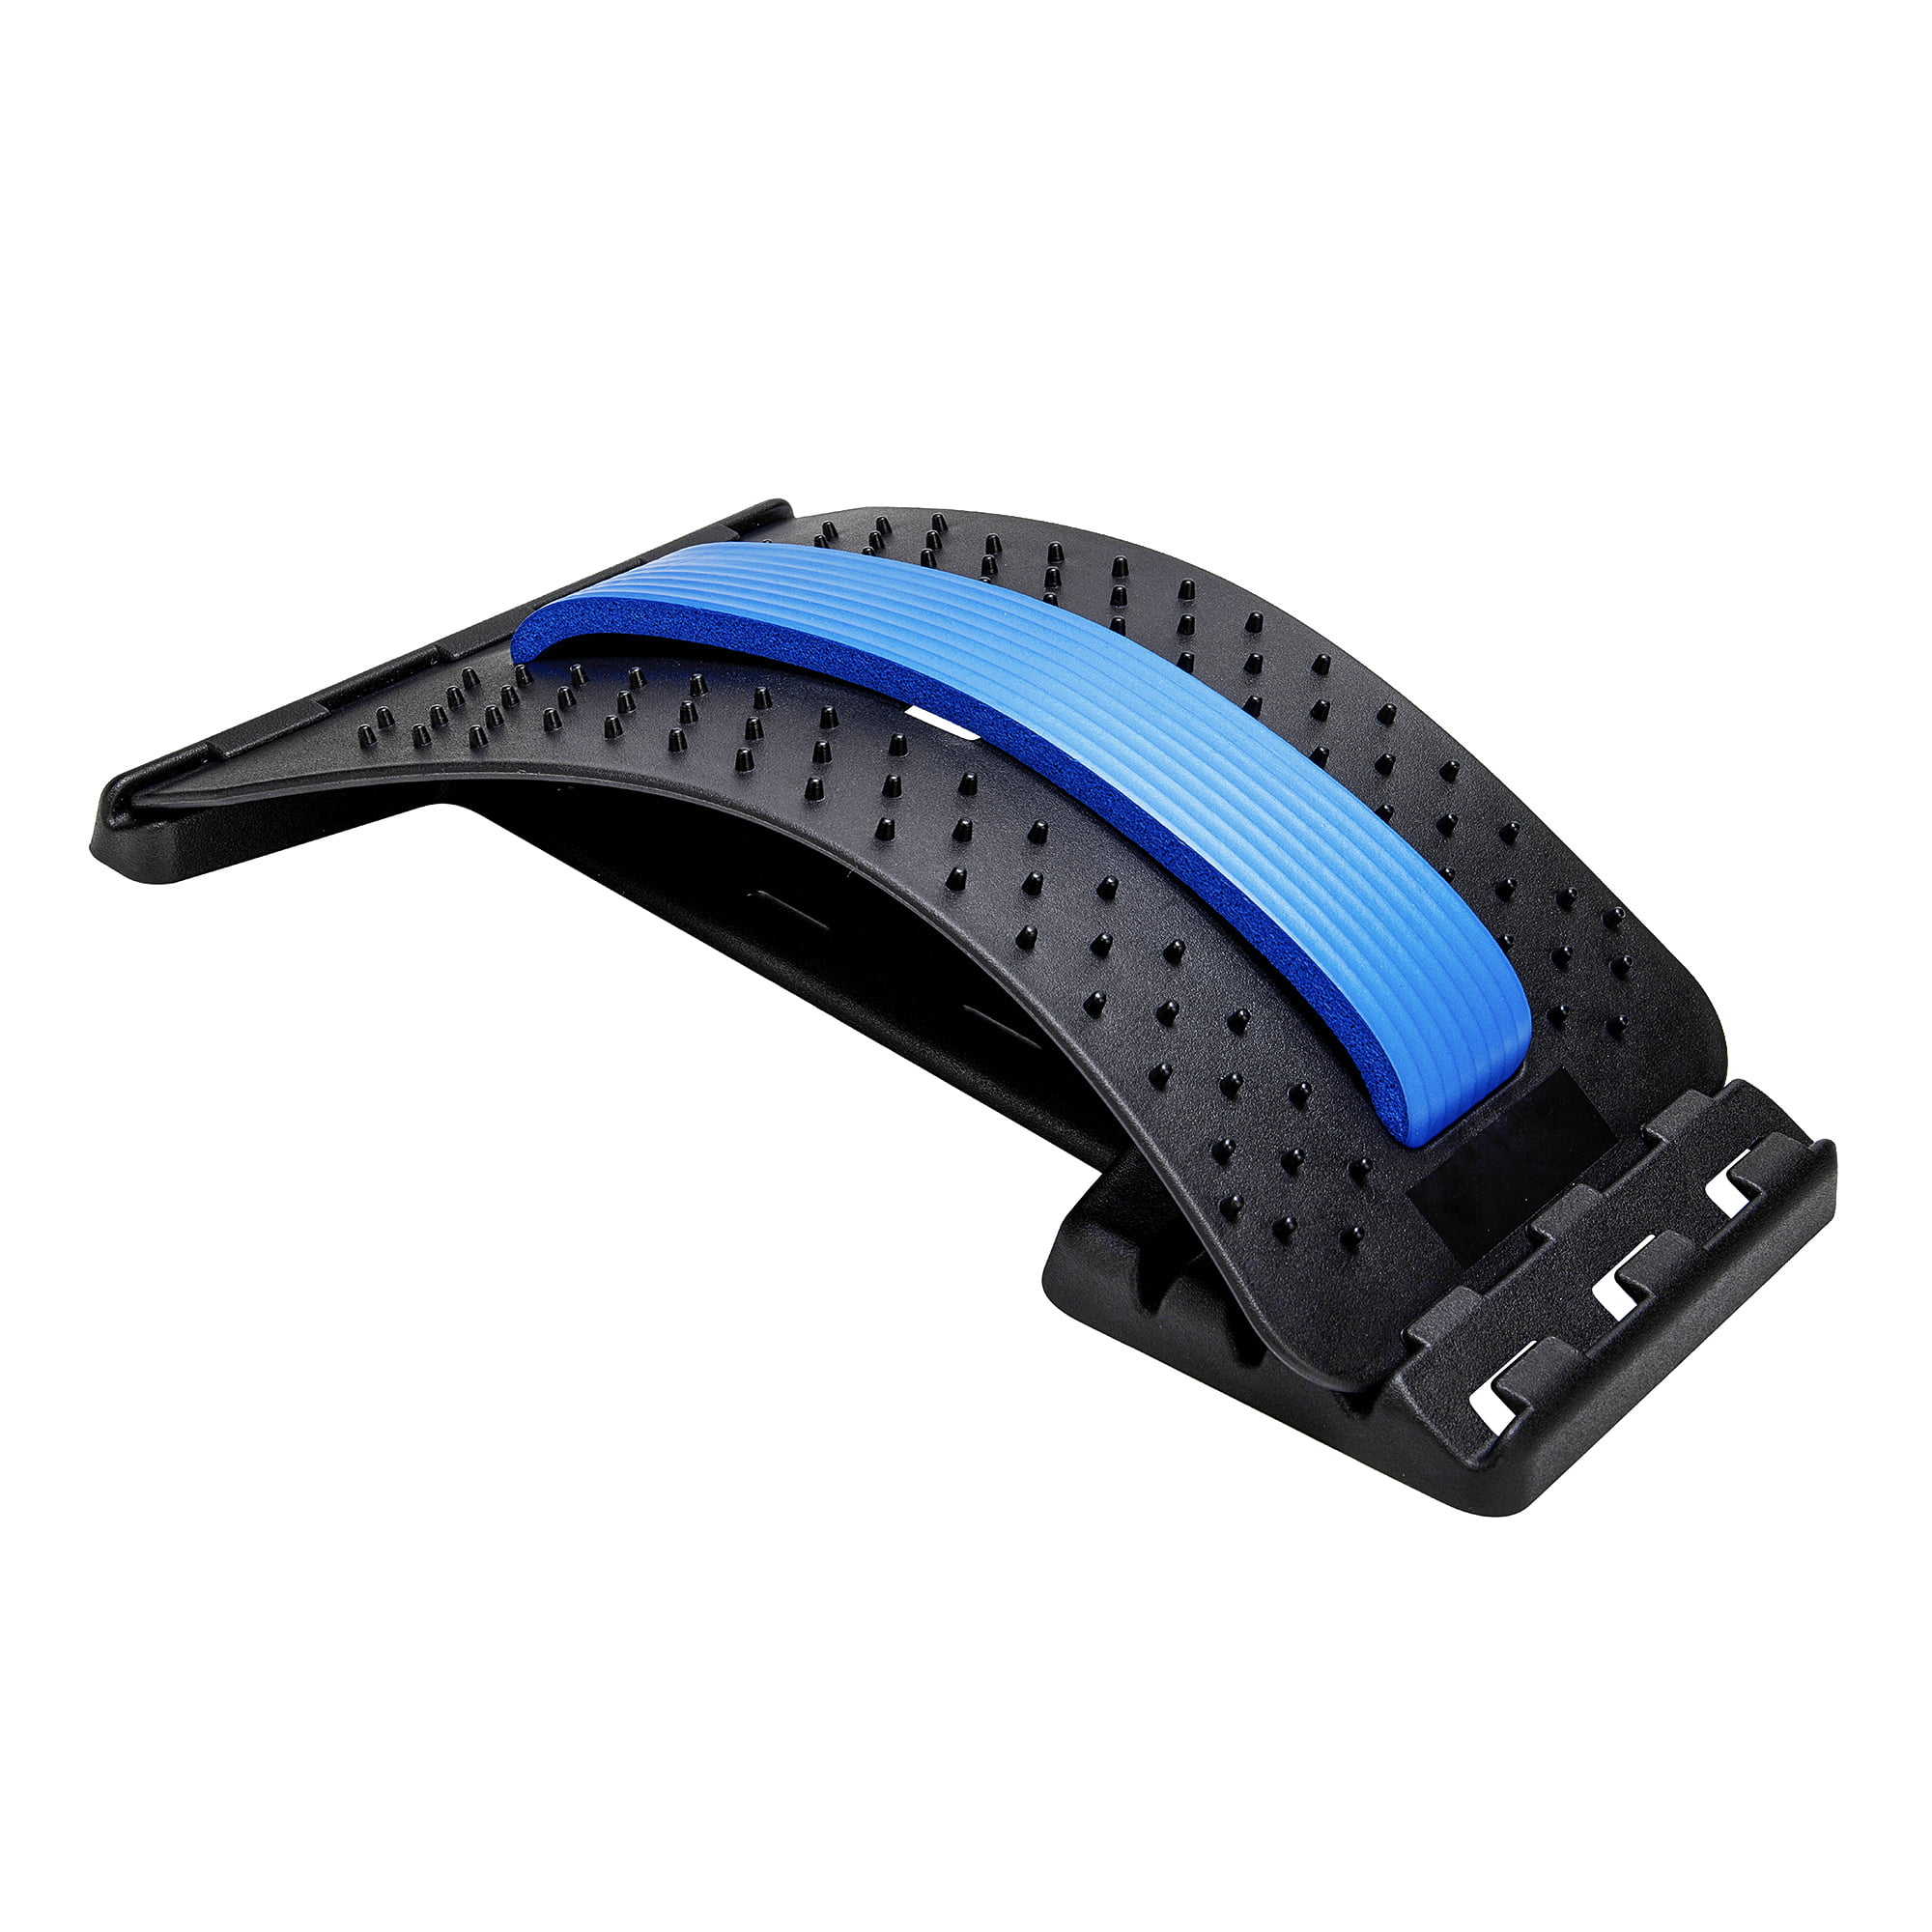 CODIVER Back Pain Relief Product, Back Stretcher, Spinal Curve Back Back /  Lumbar Support - Buy CODIVER Back Pain Relief Product, Back Stretcher,  Spinal Curve Back Back / Lumbar Support Online at